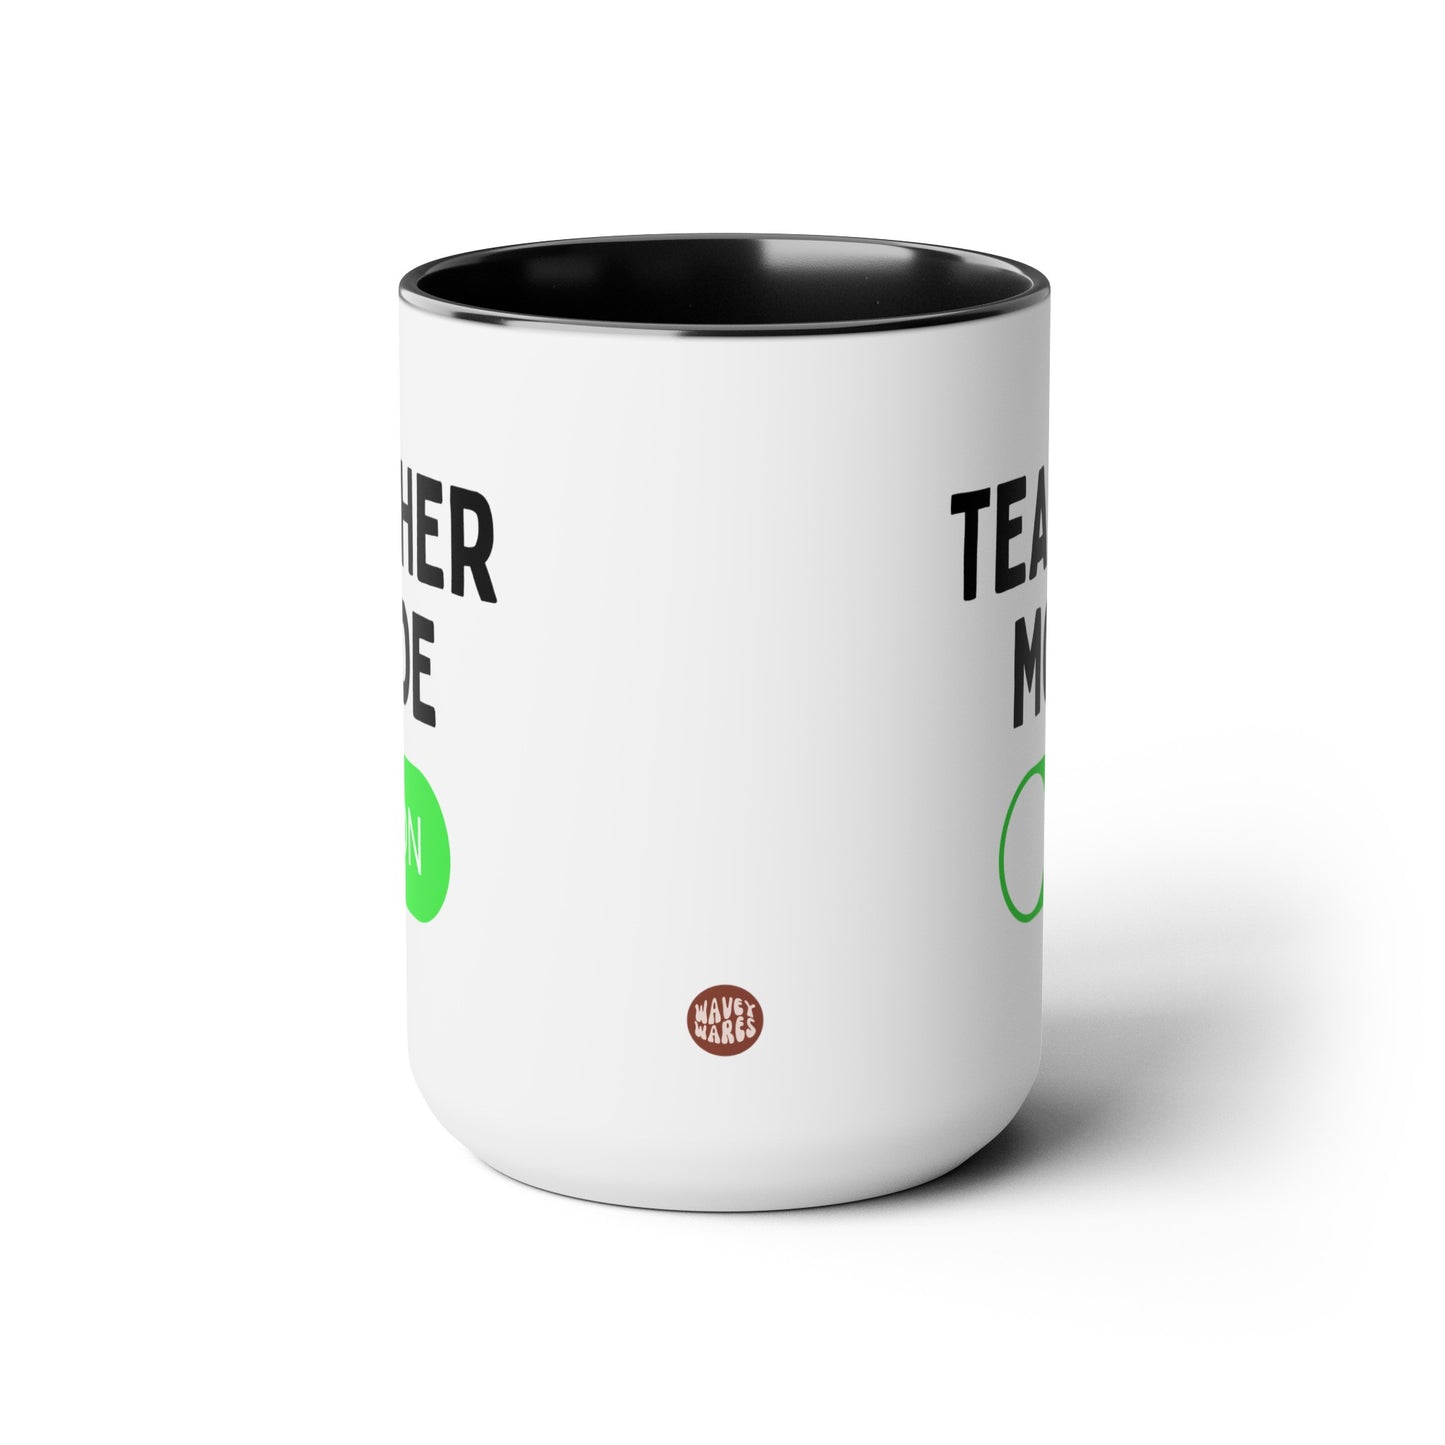 Teacher Mode On 15oz white with black accent funny large coffee mug gift for teaching assistant appreciation school thank you tutor professor waveywares wavey wares wavywares wavy wares side